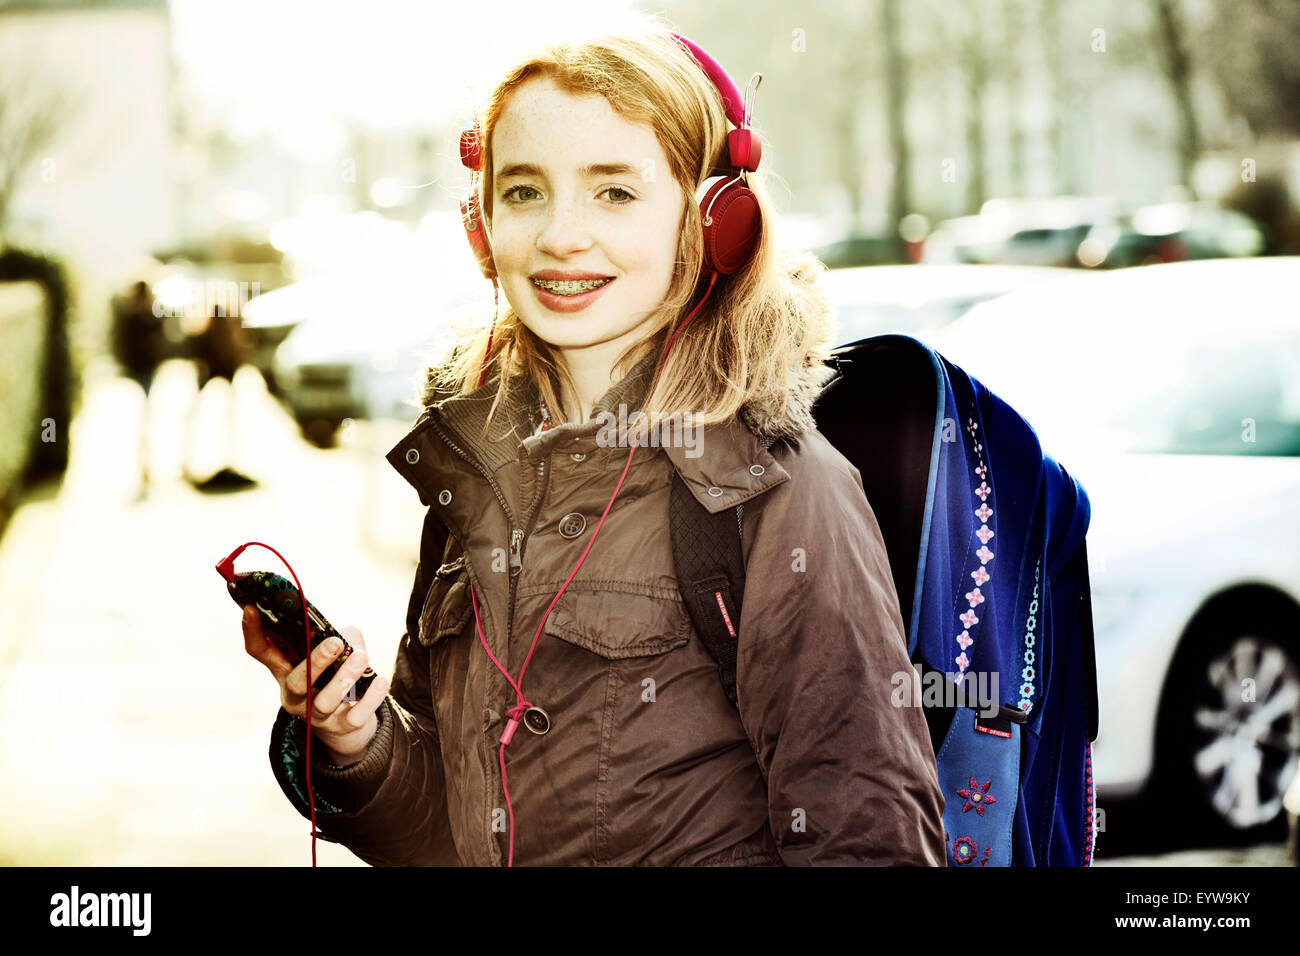 Girl with schoolbag, headphones and mobile phone on the way to school Stock Photo